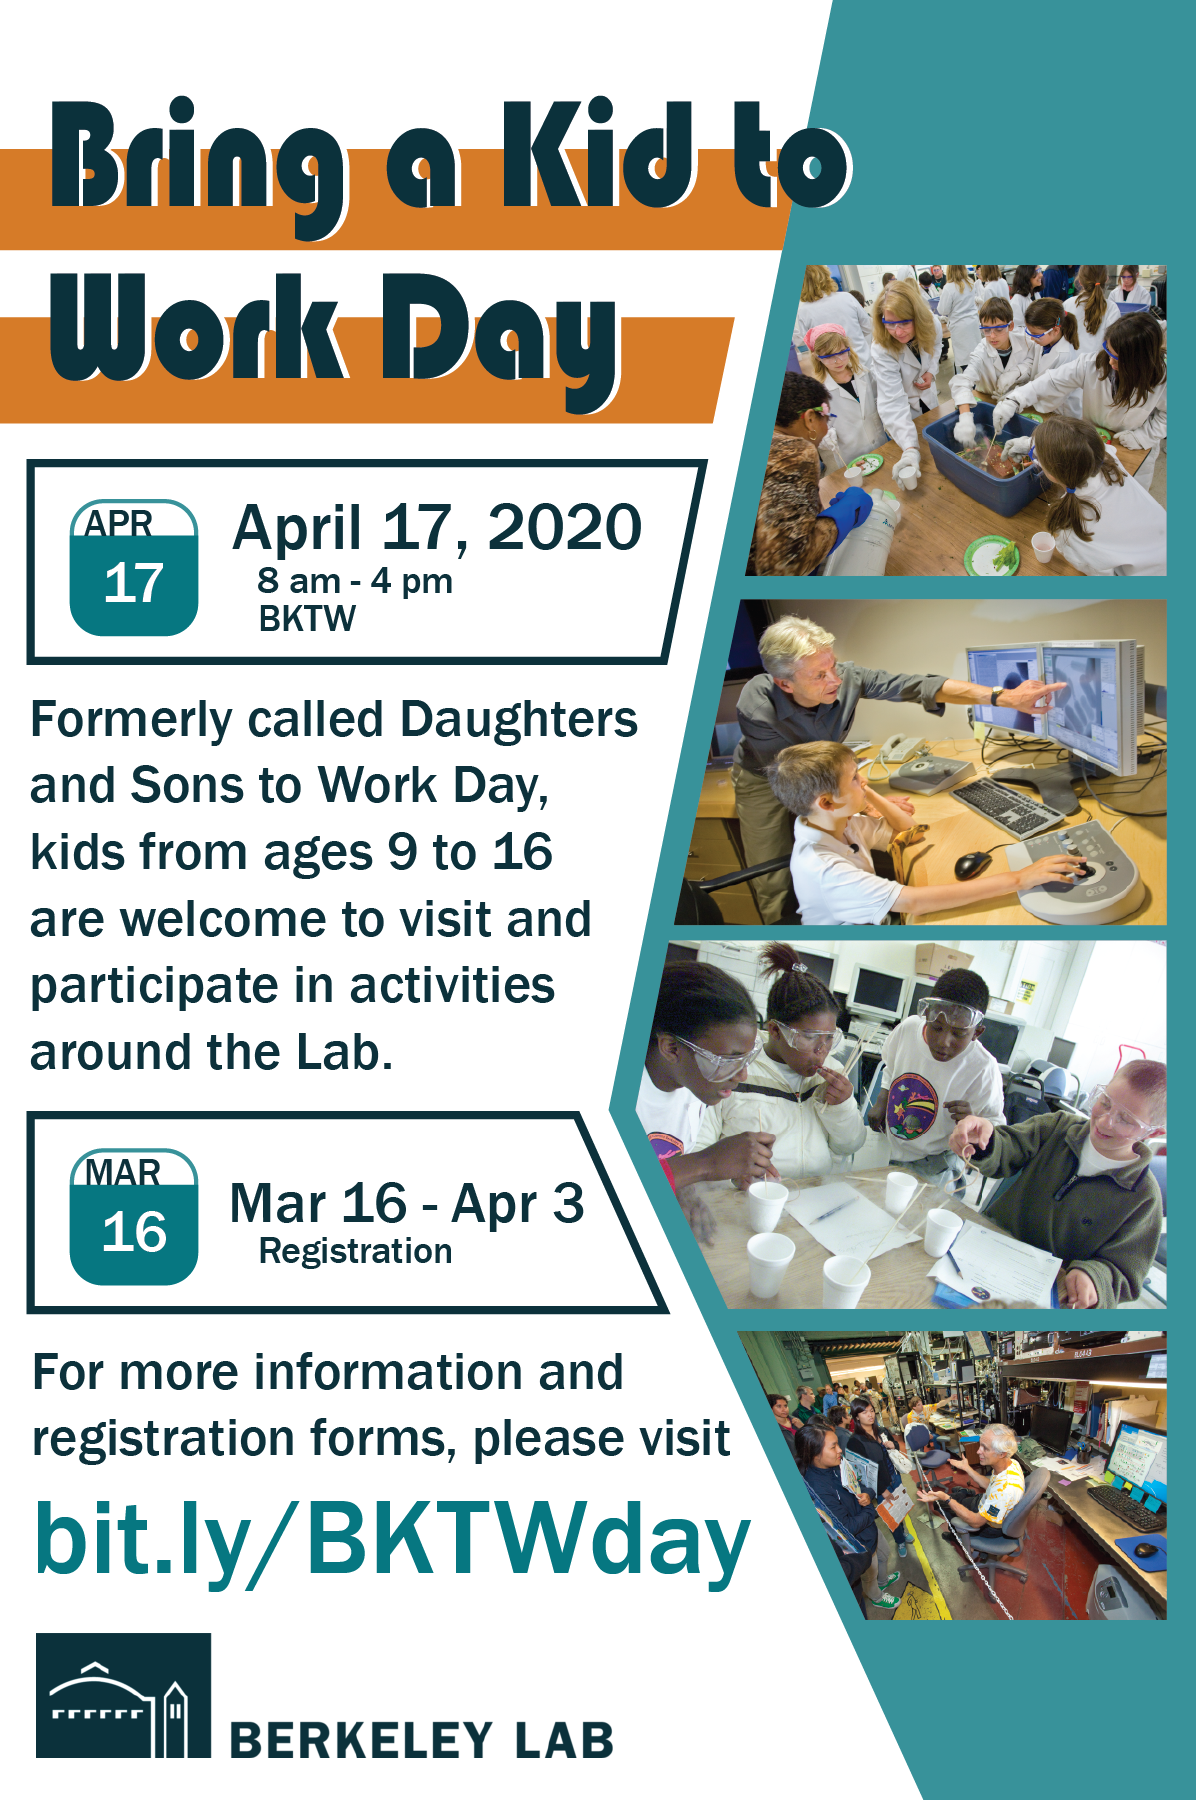 Bring a Kid to Work Day April 17, 2020